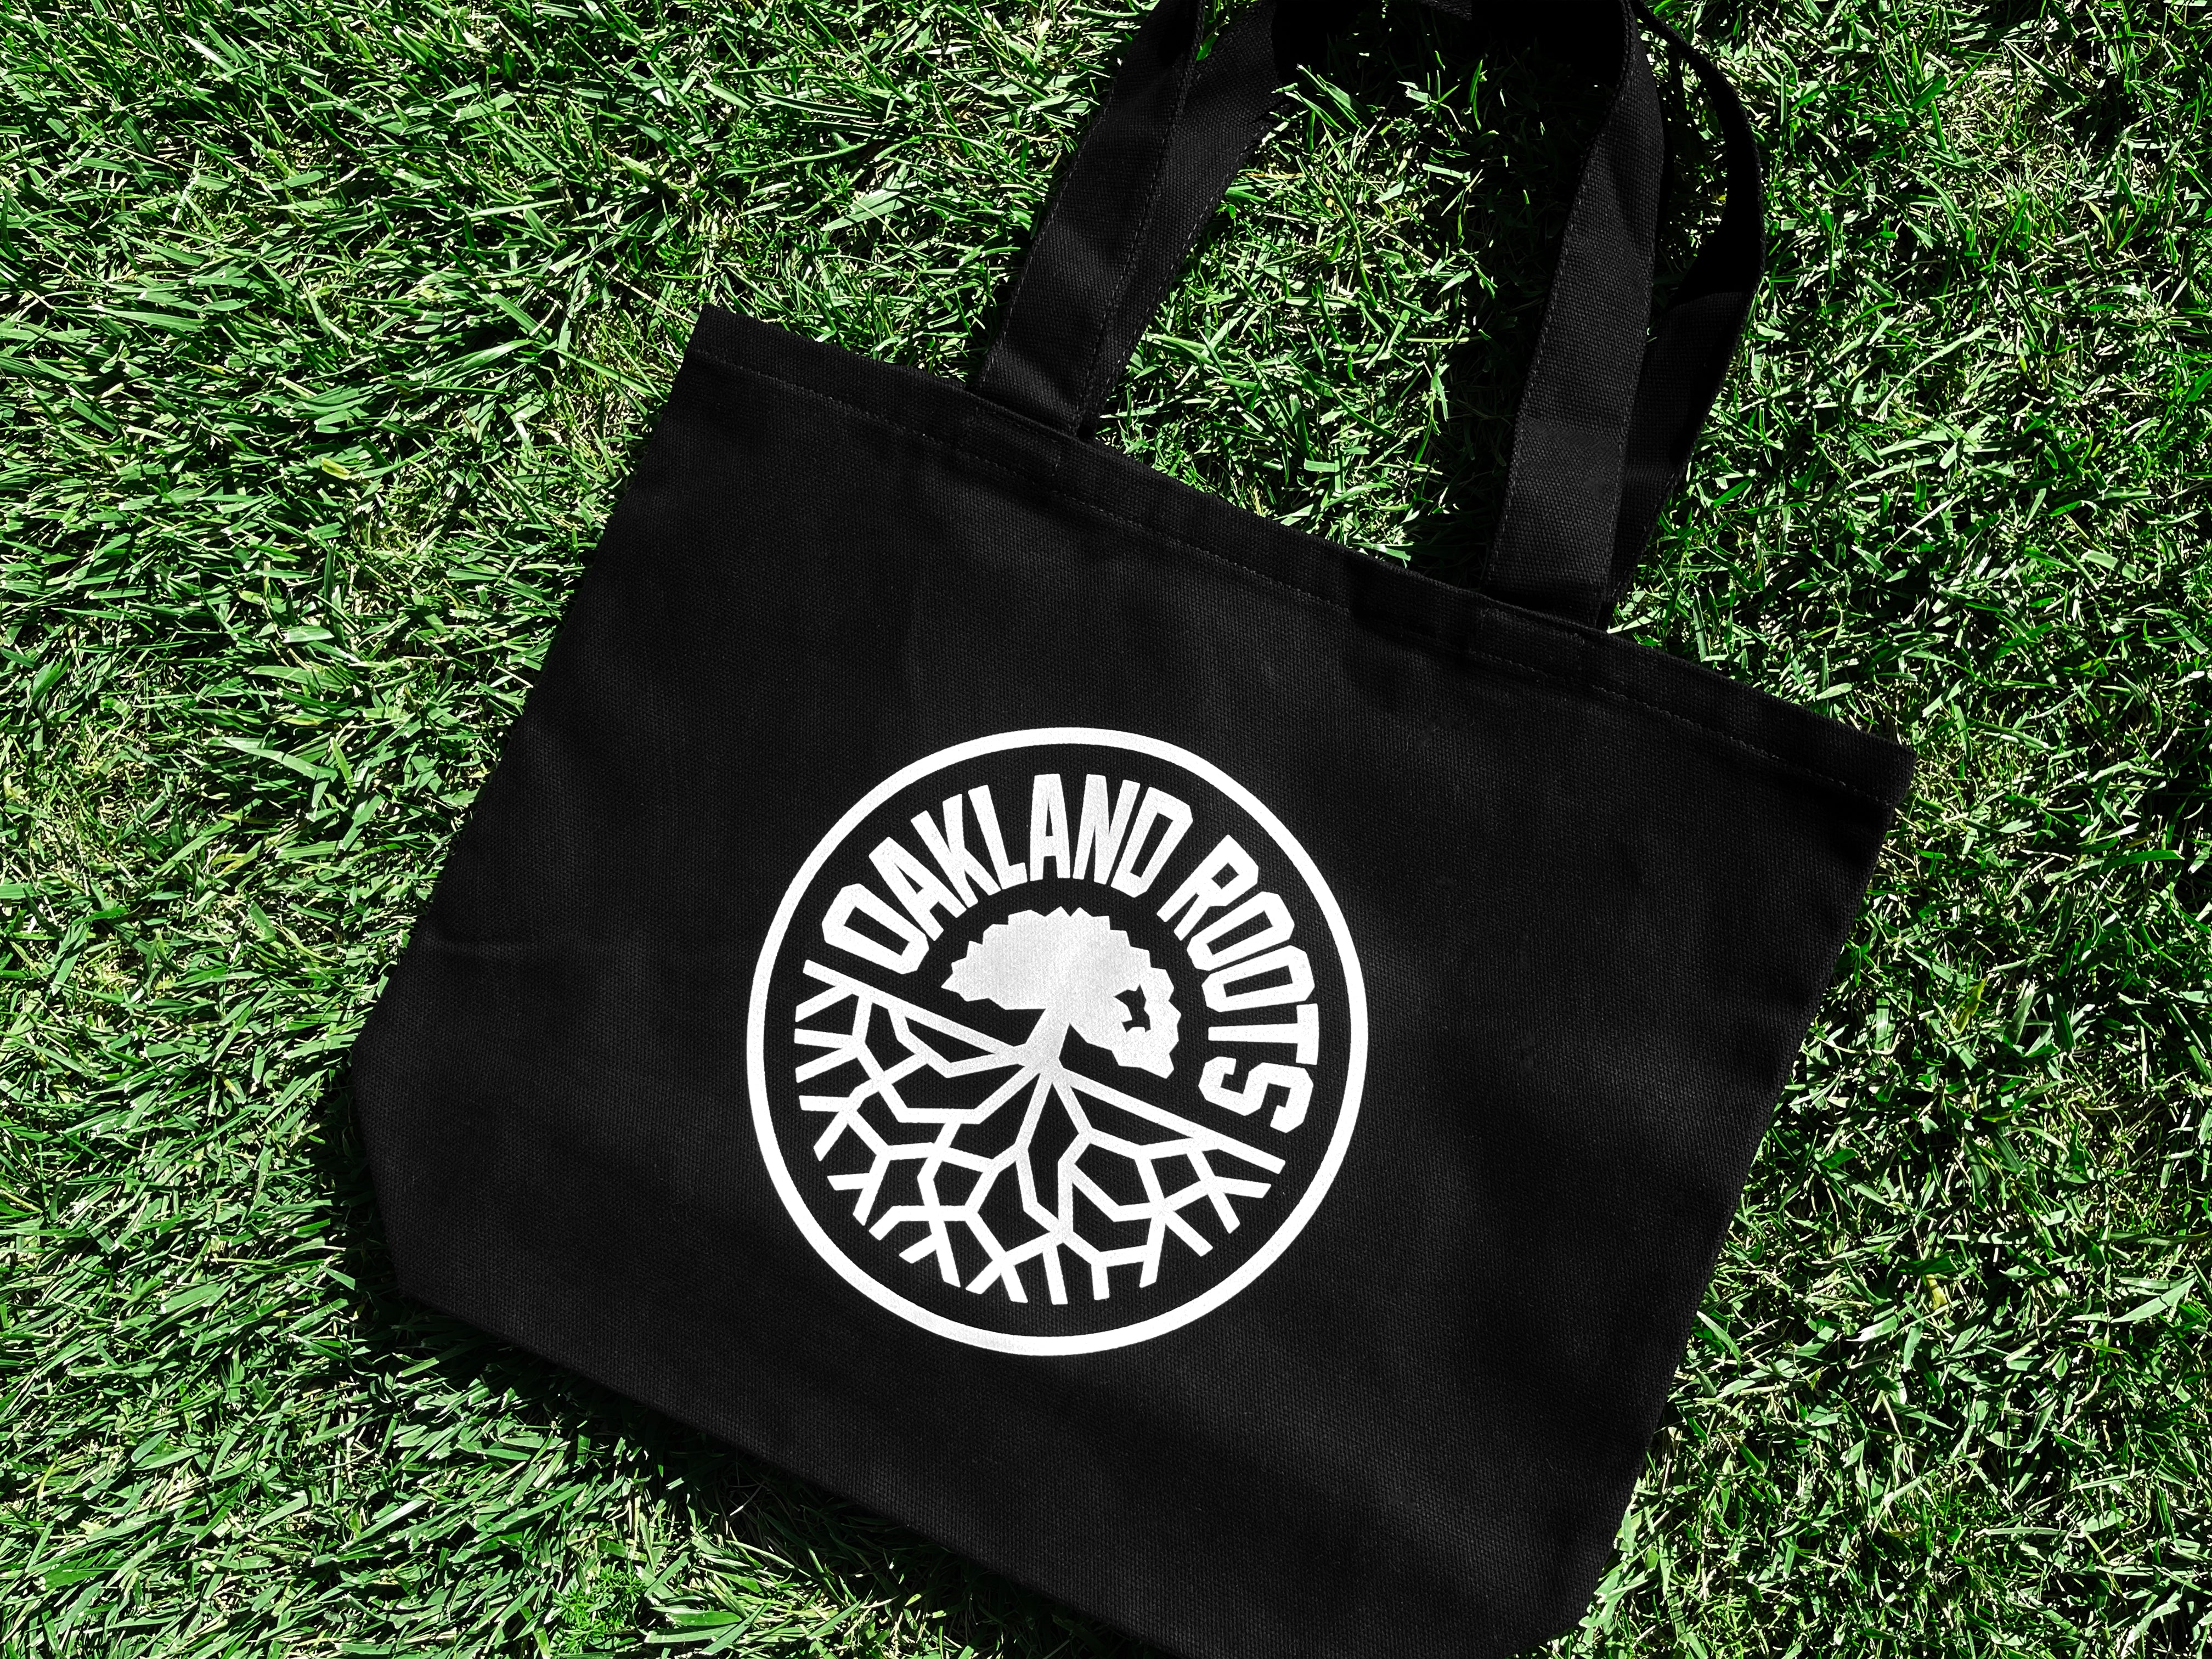 Close-up of black reusable shopping tote with large white Oakland Roots logo crest lying on grass.